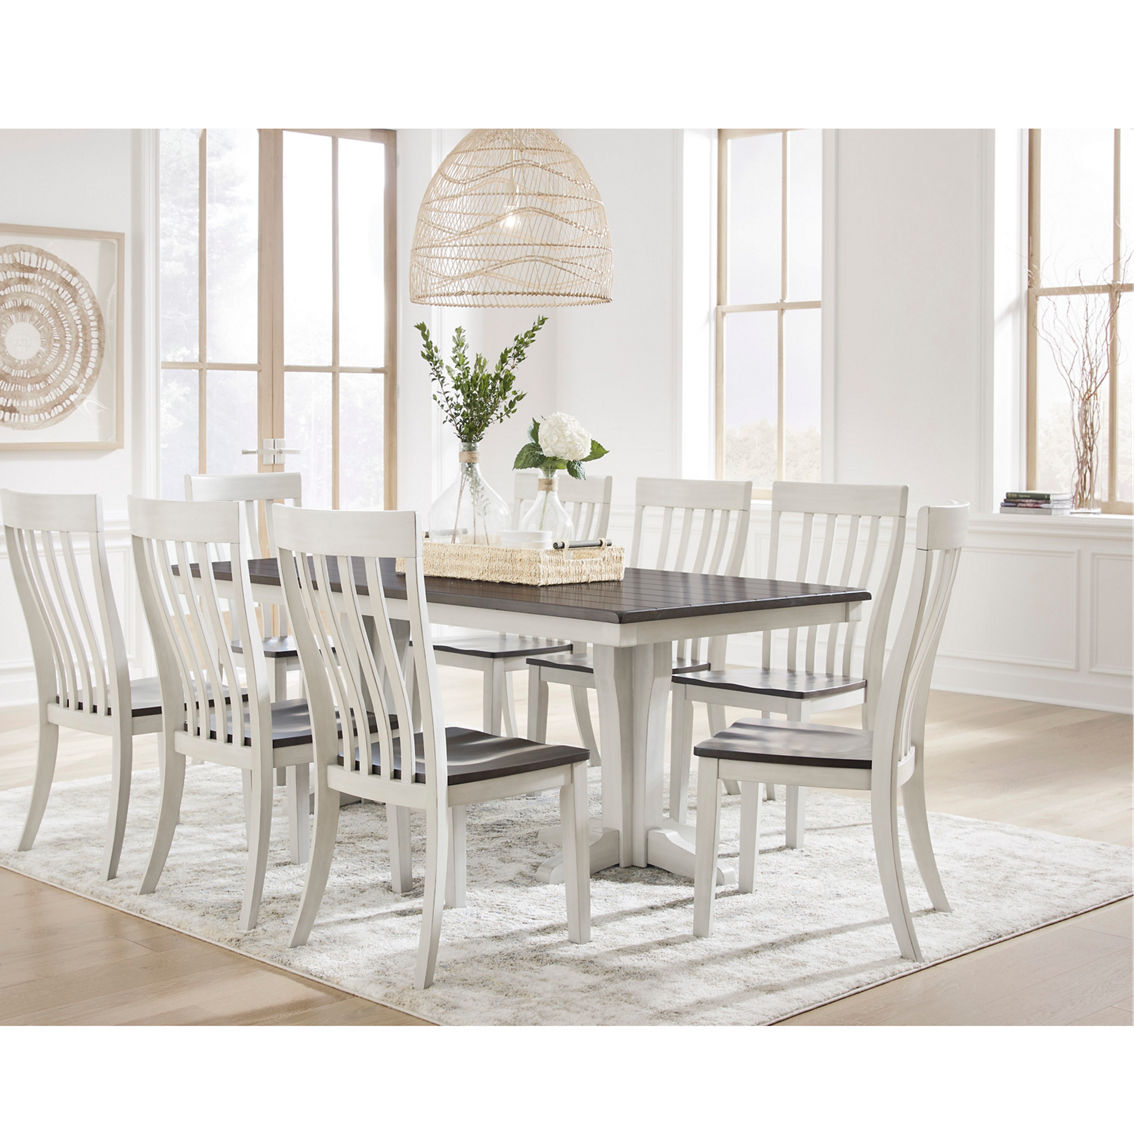 Signature Design by Ashley Darborn 9 pc. Dining Set: Table, 8 Chairs - Image 4 of 9